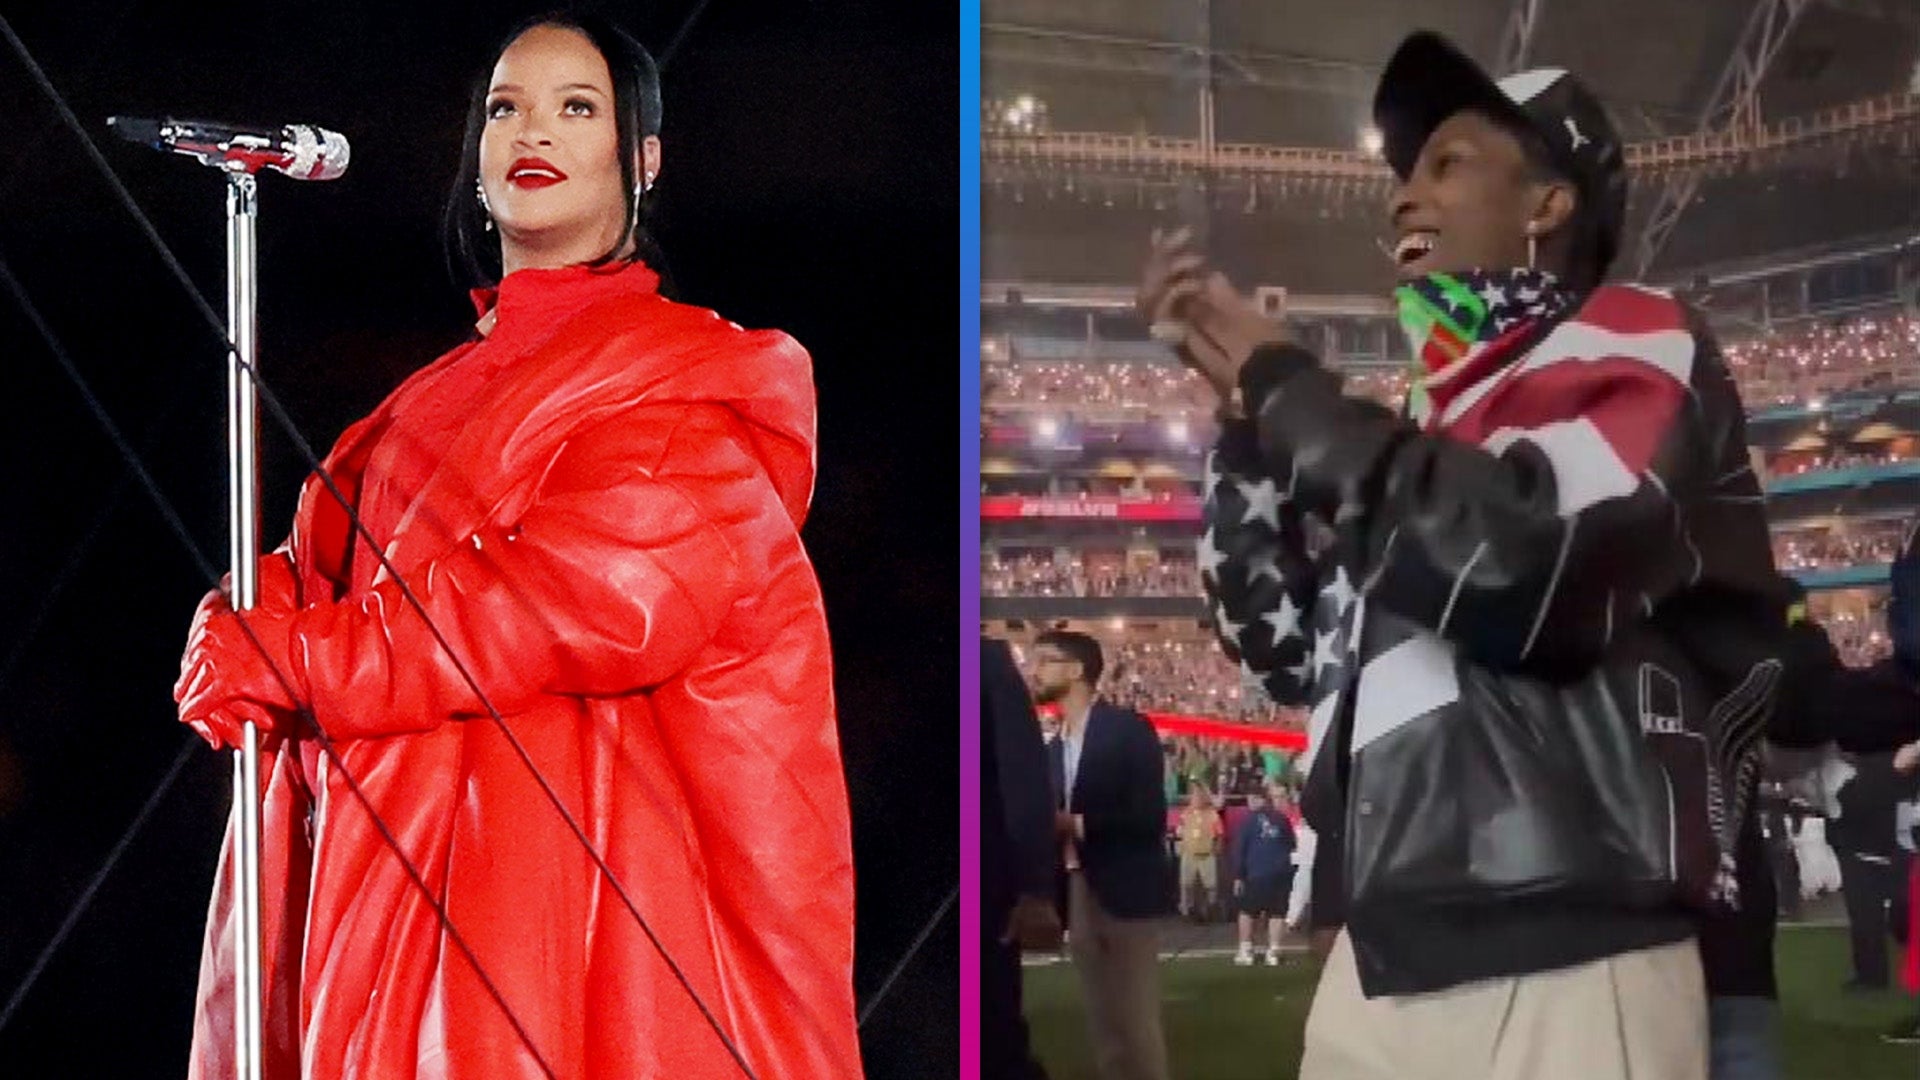 Unsurprisingly, ASAP Rocky also looked great at the Super Bowl